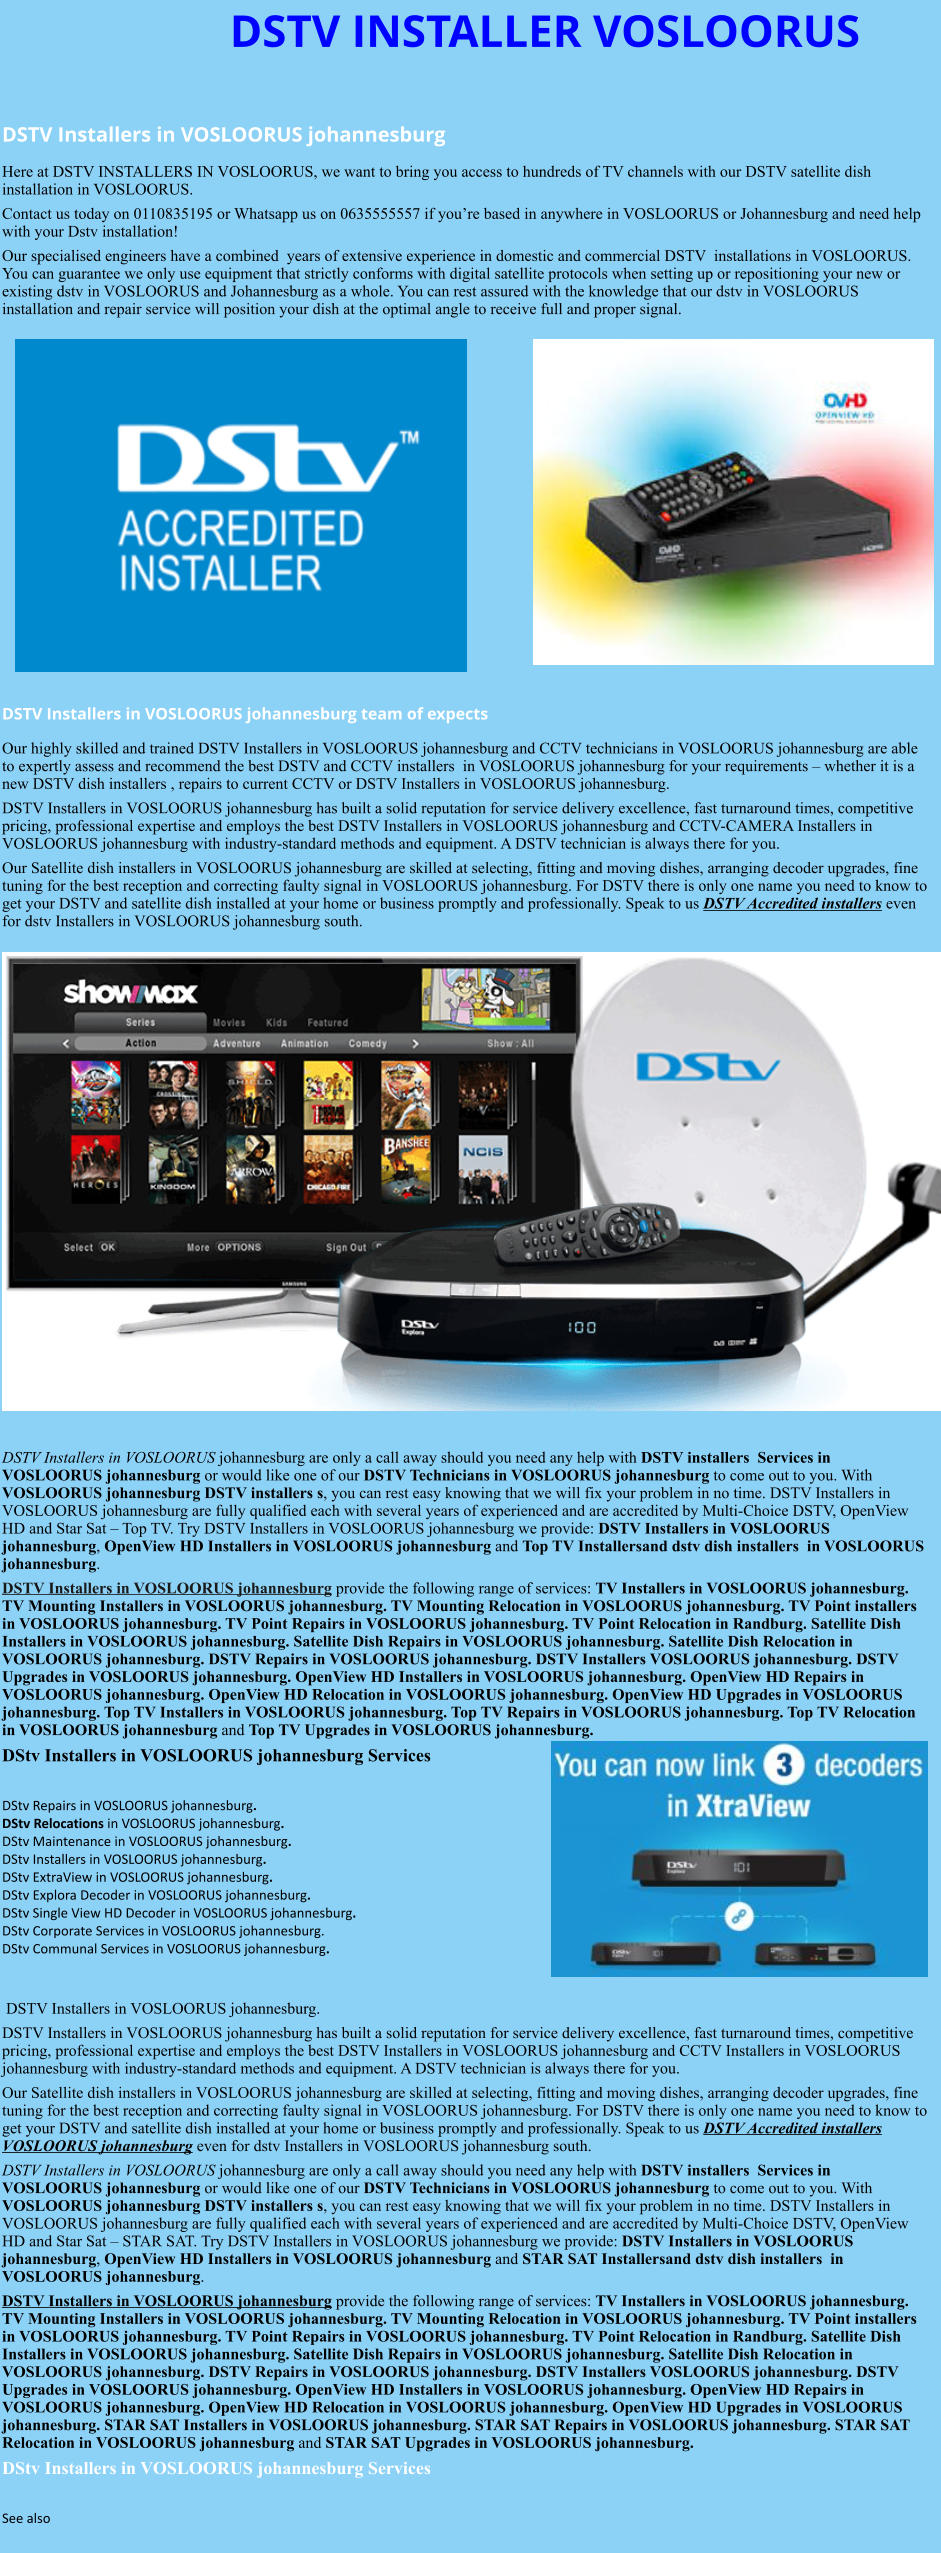 DSTV INSTALLER VOSLOORUS  DSTV Installers in VOSLOORUS johannesburg  Here at DSTV INSTALLERS IN VOSLOORUS, we want to bring you access to hundreds of TV channels with our DSTV satellite dish installation in VOSLOORUS. Contact us today on 0110835195 or Whatsapp us on 0635555557 if you’re based in anywhere in VOSLOORUS or Johannesburg and need help with your Dstv installation! Our specialised engineers have a combined  years of extensive experience in domestic and commercial DSTV  installations in VOSLOORUS. You can guarantee we only use equipment that strictly conforms with digital satellite protocols when setting up or repositioning your new or existing dstv in VOSLOORUS and Johannesburg as a whole. You can rest assured with the knowledge that our dstv in VOSLOORUS installation and repair service will position your dish at the optimal angle to receive full and proper signal.                DSTV Installers in VOSLOORUS johannesburg team of expects Our highly skilled and trained DSTV Installers in VOSLOORUS johannesburg and CCTV technicians in VOSLOORUS johannesburg are able to expertly assess and recommend the best DSTV and CCTV installers  in VOSLOORUS johannesburg for your requirements – whether it is a new DSTV dish installers , repairs to current CCTV or DSTV Installers in VOSLOORUS johannesburg. DSTV Installers in VOSLOORUS johannesburg has built a solid reputation for service delivery excellence, fast turnaround times, competitive pricing, professional expertise and employs the best DSTV Installers in VOSLOORUS johannesburg and CCTV-CAMERA Installers in VOSLOORUS johannesburg with industry-standard methods and equipment. A DSTV technician is always there for you. Our Satellite dish installers in VOSLOORUS johannesburg are skilled at selecting, fitting and moving dishes, arranging decoder upgrades, fine tuning for the best reception and correcting faulty signal in VOSLOORUS johannesburg. For DSTV there is only one name you need to know to get your DSTV and satellite dish installed at your home or business promptly and professionally. Speak to us DSTV Accredited installers even for dstv Installers in VOSLOORUS johannesburg south.                      DSTV Installers in VOSLOORUS johannesburg are only a call away should you need any help with DSTV installers  Services in VOSLOORUS johannesburg or would like one of our DSTV Technicians in VOSLOORUS johannesburg to come out to you. With VOSLOORUS johannesburg DSTV installers s, you can rest easy knowing that we will fix your problem in no time. DSTV Installers in VOSLOORUS johannesburg are fully qualified each with several years of experienced and are accredited by Multi-Choice DSTV, OpenView HD and Star Sat – Top TV. Try DSTV Installers in VOSLOORUS johannesburg we provide: DSTV Installers in VOSLOORUS johannesburg, OpenView HD Installers in VOSLOORUS johannesburg and Top TV Installersand dstv dish installers  in VOSLOORUS johannesburg. DSTV Installers in VOSLOORUS johannesburg provide the following range of services: TV Installers in VOSLOORUS johannesburg. TV Mounting Installers in VOSLOORUS johannesburg. TV Mounting Relocation in VOSLOORUS johannesburg. TV Point installers  in VOSLOORUS johannesburg. TV Point Repairs in VOSLOORUS johannesburg. TV Point Relocation in Randburg. Satellite Dish Installers in VOSLOORUS johannesburg. Satellite Dish Repairs in VOSLOORUS johannesburg. Satellite Dish Relocation in VOSLOORUS johannesburg. DSTV Repairs in VOSLOORUS johannesburg. DSTV Installers VOSLOORUS johannesburg. DSTV Upgrades in VOSLOORUS johannesburg. OpenView HD Installers in VOSLOORUS johannesburg. OpenView HD Repairs in VOSLOORUS johannesburg. OpenView HD Relocation in VOSLOORUS johannesburg. OpenView HD Upgrades in VOSLOORUS johannesburg. Top TV Installers in VOSLOORUS johannesburg. Top TV Repairs in VOSLOORUS johannesburg. Top TV Relocation in VOSLOORUS johannesburg and Top TV Upgrades in VOSLOORUS johannesburg. DStv Installers in VOSLOORUS johannesburg Services  DStv Repairs in VOSLOORUS johannesburg.  DStv Relocations in VOSLOORUS johannesburg.  DStv Maintenance in VOSLOORUS johannesburg. DStv Installers in VOSLOORUS johannesburg. DStv ExtraView in VOSLOORUS johannesburg. DStv Explora Decoder in VOSLOORUS johannesburg. DStv Single View HD Decoder in VOSLOORUS johannesburg. DStv Corporate Services in VOSLOORUS johannesburg. DStv Communal Services in VOSLOORUS johannesburg.    DSTV Installers in VOSLOORUS johannesburg. DSTV Installers in VOSLOORUS johannesburg has built a solid reputation for service delivery excellence, fast turnaround times, competitive pricing, professional expertise and employs the best DSTV Installers in VOSLOORUS johannesburg and CCTV Installers in VOSLOORUS johannesburg with industry-standard methods and equipment. A DSTV technician is always there for you. Our Satellite dish installers in VOSLOORUS johannesburg are skilled at selecting, fitting and moving dishes, arranging decoder upgrades, fine tuning for the best reception and correcting faulty signal in VOSLOORUS johannesburg. For DSTV there is only one name you need to know to get your DSTV and satellite dish installed at your home or business promptly and professionally. Speak to us DSTV Accredited installers VOSLOORUS johannesburg even for dstv Installers in VOSLOORUS johannesburg south. DSTV Installers in VOSLOORUS johannesburg are only a call away should you need any help with DSTV installers  Services in VOSLOORUS johannesburg or would like one of our DSTV Technicians in VOSLOORUS johannesburg to come out to you. With VOSLOORUS johannesburg DSTV installers s, you can rest easy knowing that we will fix your problem in no time. DSTV Installers in VOSLOORUS johannesburg are fully qualified each with several years of experienced and are accredited by Multi-Choice DSTV, OpenView HD and Star Sat – STAR SAT. Try DSTV Installers in VOSLOORUS johannesburg we provide: DSTV Installers in VOSLOORUS johannesburg, OpenView HD Installers in VOSLOORUS johannesburg and STAR SAT Installersand dstv dish installers  in VOSLOORUS johannesburg. DSTV Installers in VOSLOORUS johannesburg provide the following range of services: TV Installers in VOSLOORUS johannesburg. TV Mounting Installers in VOSLOORUS johannesburg. TV Mounting Relocation in VOSLOORUS johannesburg. TV Point installers  in VOSLOORUS johannesburg. TV Point Repairs in VOSLOORUS johannesburg. TV Point Relocation in Randburg. Satellite Dish Installers in VOSLOORUS johannesburg. Satellite Dish Repairs in VOSLOORUS johannesburg. Satellite Dish Relocation in VOSLOORUS johannesburg. DSTV Repairs in VOSLOORUS johannesburg. DSTV Installers VOSLOORUS johannesburg. DSTV Upgrades in VOSLOORUS johannesburg. OpenView HD Installers in VOSLOORUS johannesburg. OpenView HD Repairs in VOSLOORUS johannesburg. OpenView HD Relocation in VOSLOORUS johannesburg. OpenView HD Upgrades in VOSLOORUS johannesburg. STAR SAT Installers in VOSLOORUS johannesburg. STAR SAT Repairs in VOSLOORUS johannesburg. STAR SAT Relocation in VOSLOORUS johannesburg and STAR SAT Upgrades in VOSLOORUS johannesburg. DStv Installers in VOSLOORUS johannesburg Services  See also